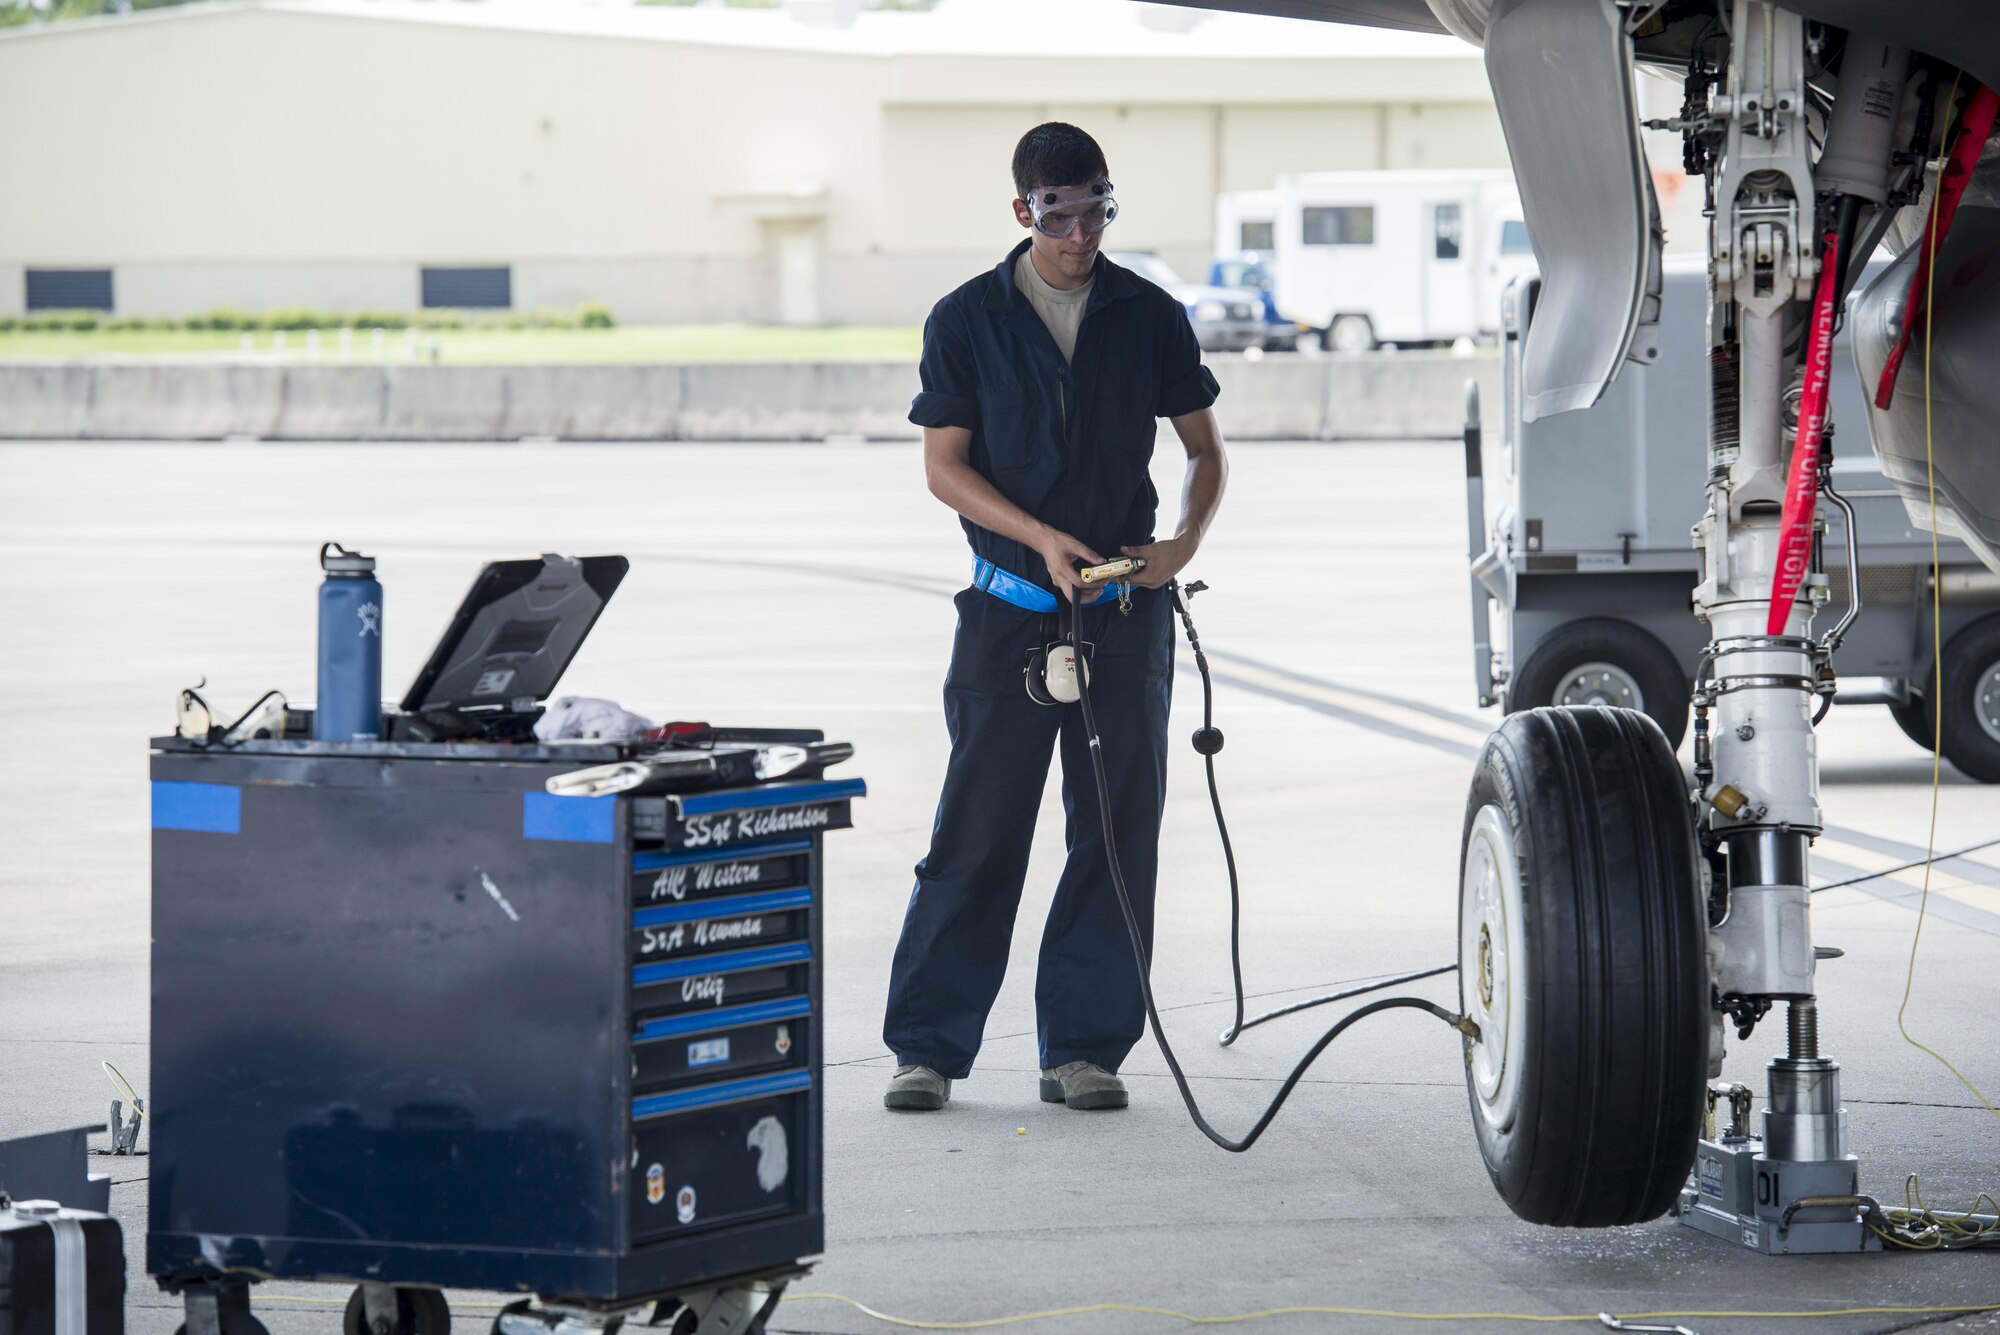 Airman Travis Boyle, 33rd Aircraft Maintenance Unit crew chief, services an F-35A wheel Aug. 2, 2016, at Eglin Air Force Base, Fla. During the Aug. 1-3 sortie surge 58th AMU Airmen kept up with the high-tempo demand to provide safe and reliable aircraft for 111 sorties. (U.S. Air Force photo by Senior Airman Stormy Archer)